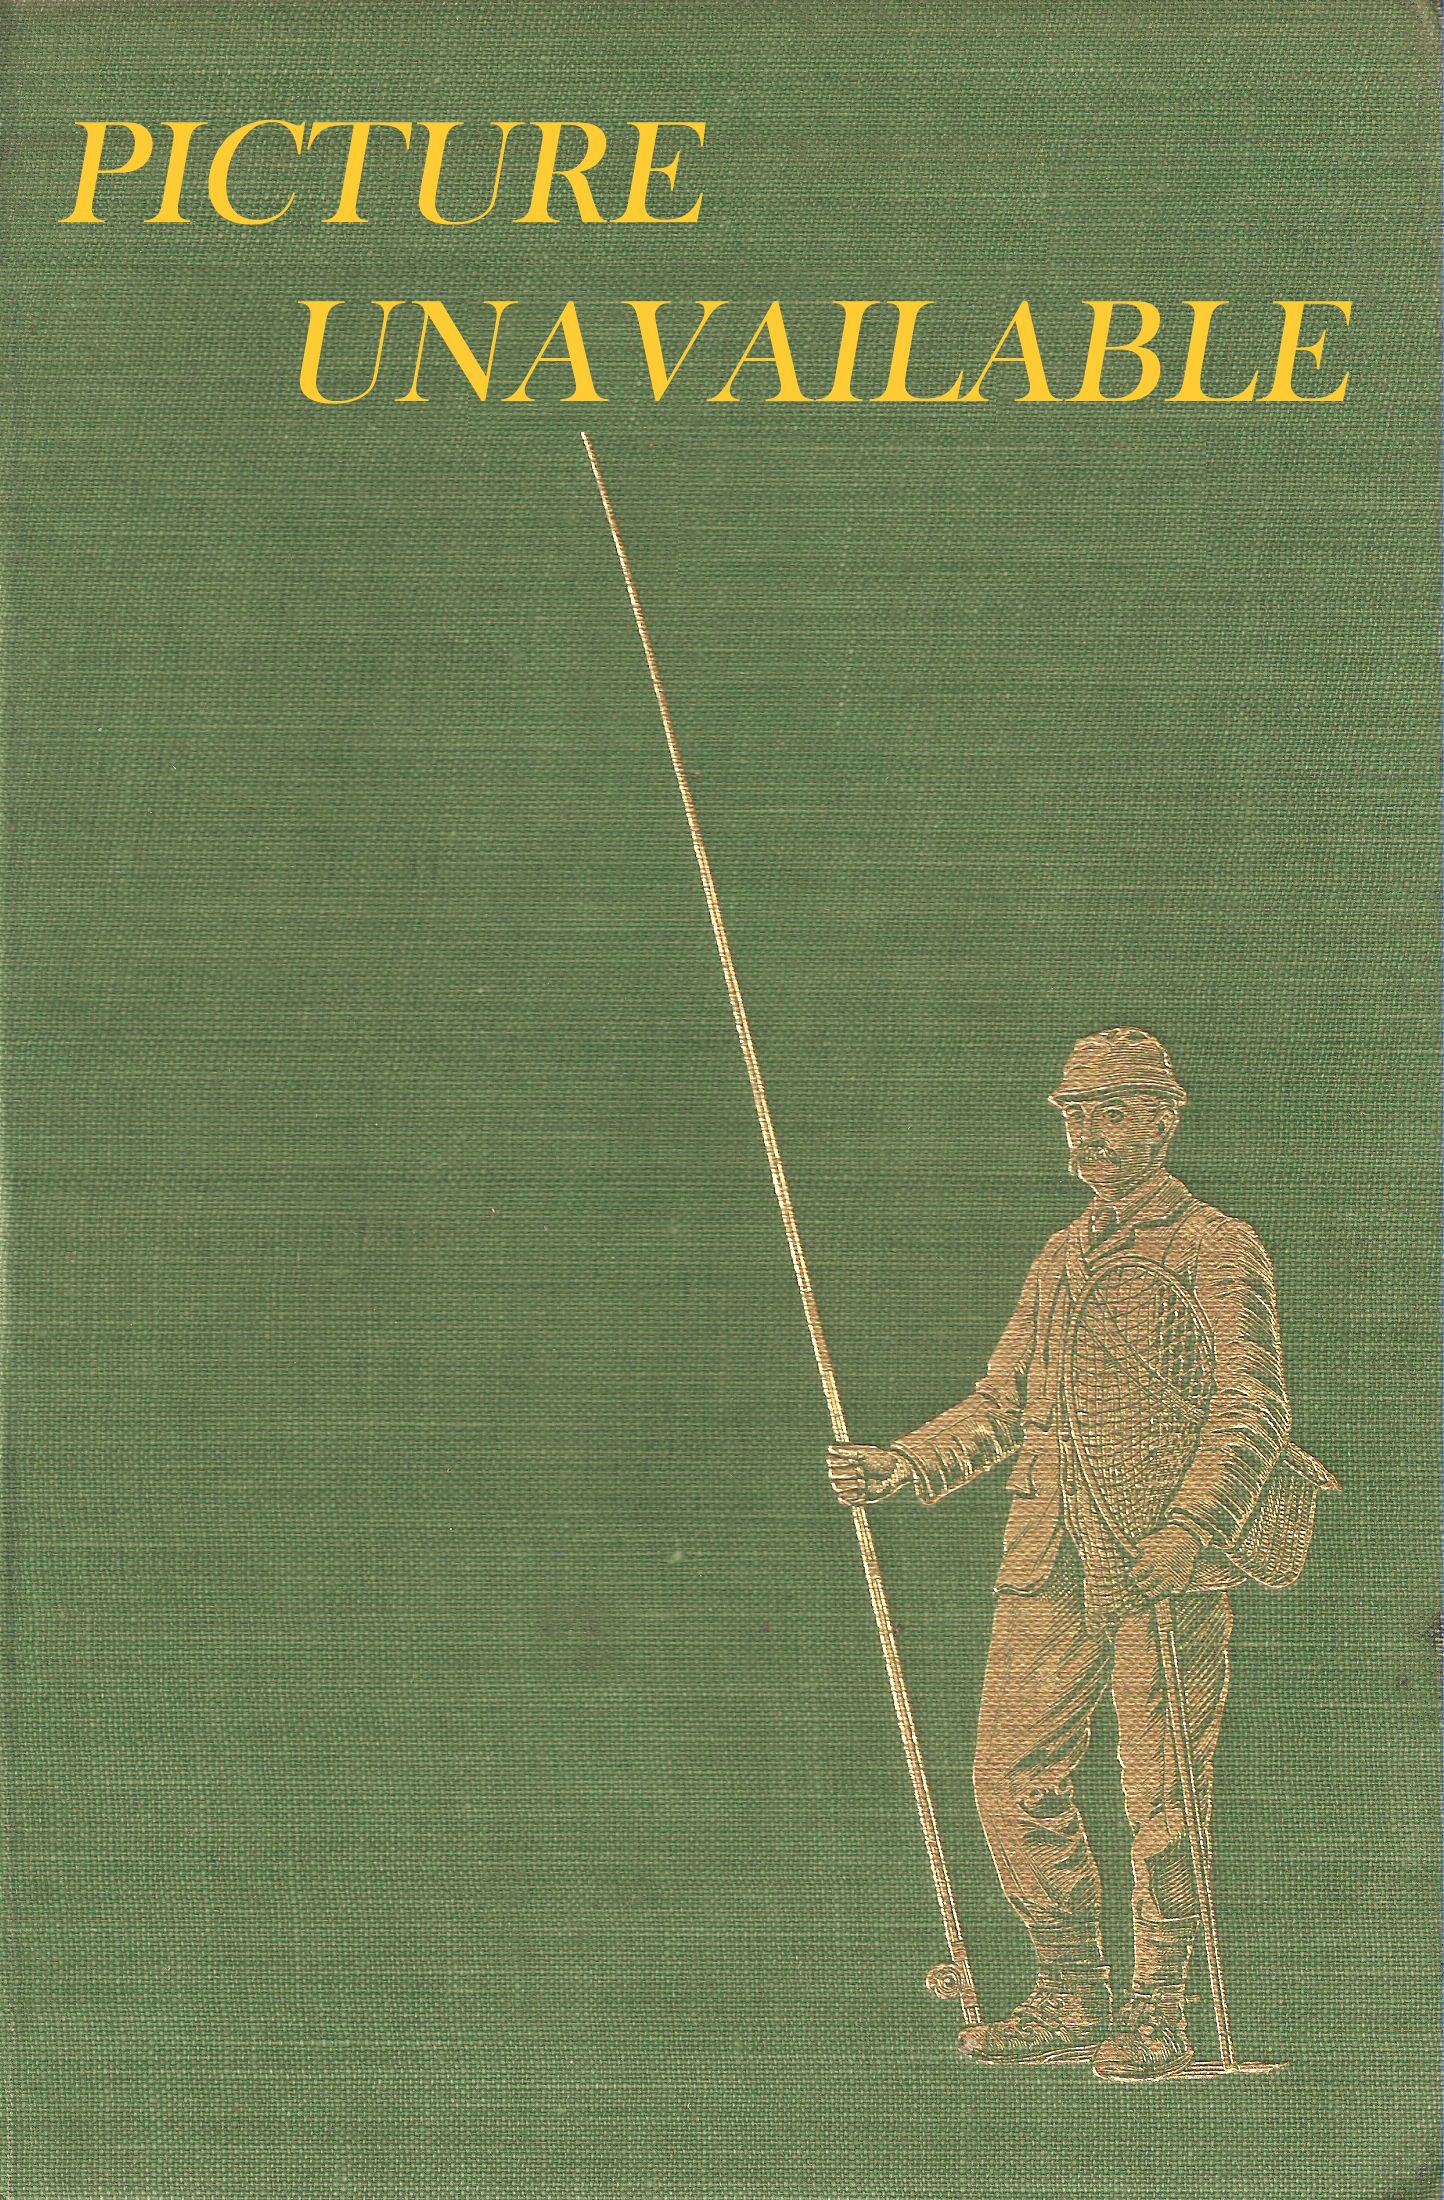 THE TECHNIQUE OF SEA FISHING. Written and illustrated by W.E. Davies.